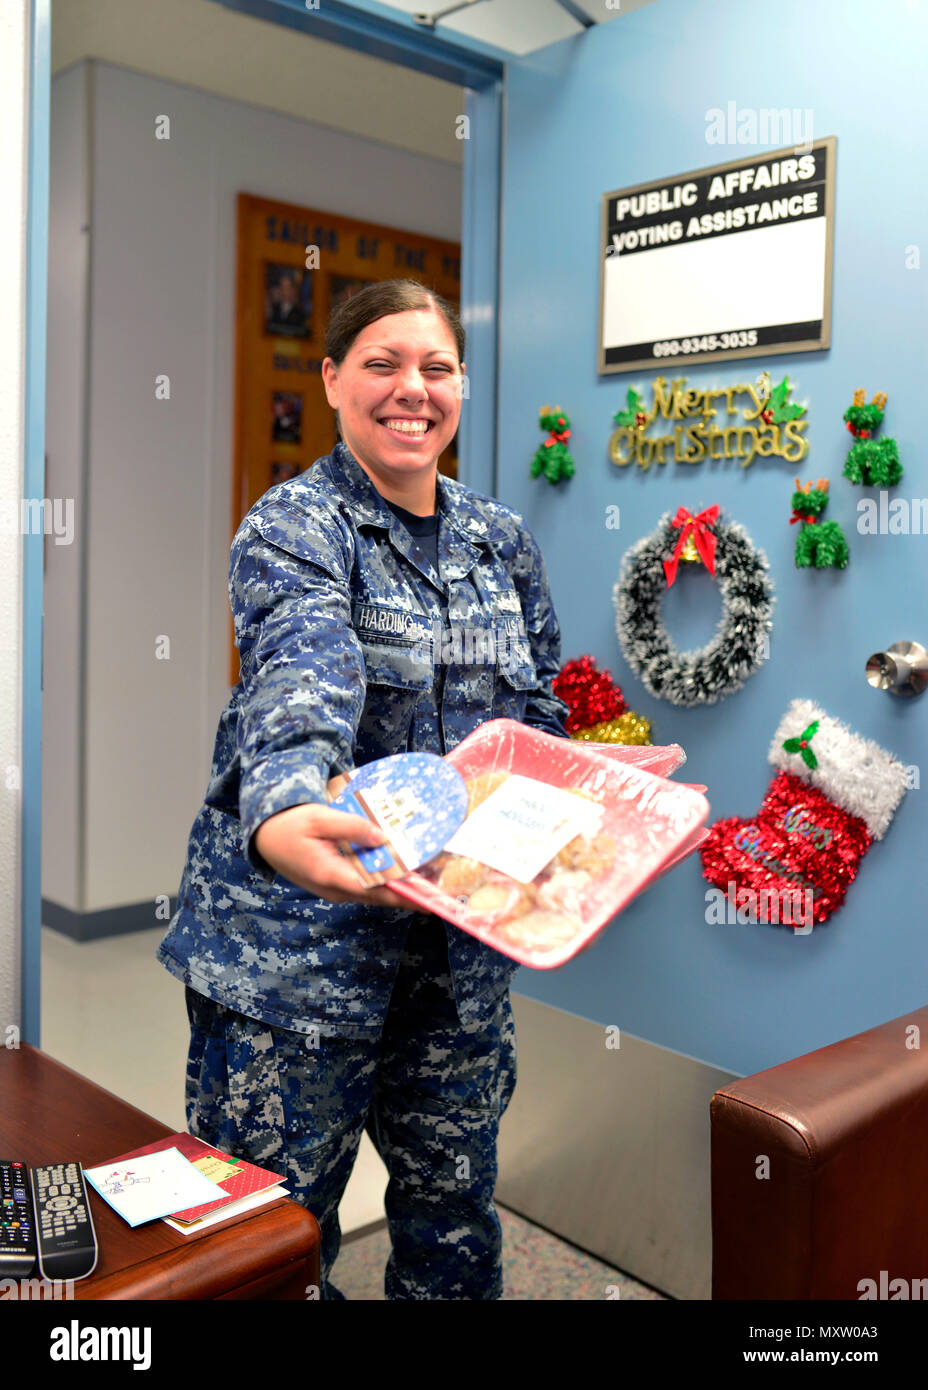 161207-N-OK605-021 MISAWA, Japan (Dec. 7, 2016) Petty Officer 2nd Class Raven Harding hands out packages of cookies for the 2016 Cookie Caper at Misawa Airbase. Hundreds of volunteers made over 36,000 cookies and packaged them into 3,000 gifts to give to single unaccompanied Servicemembers stationed at Misawa Airbase for the holidays. (U.S. Navy Photo by Petty Officer 2nd Class Samuel Weldin/Released) Stock Photo